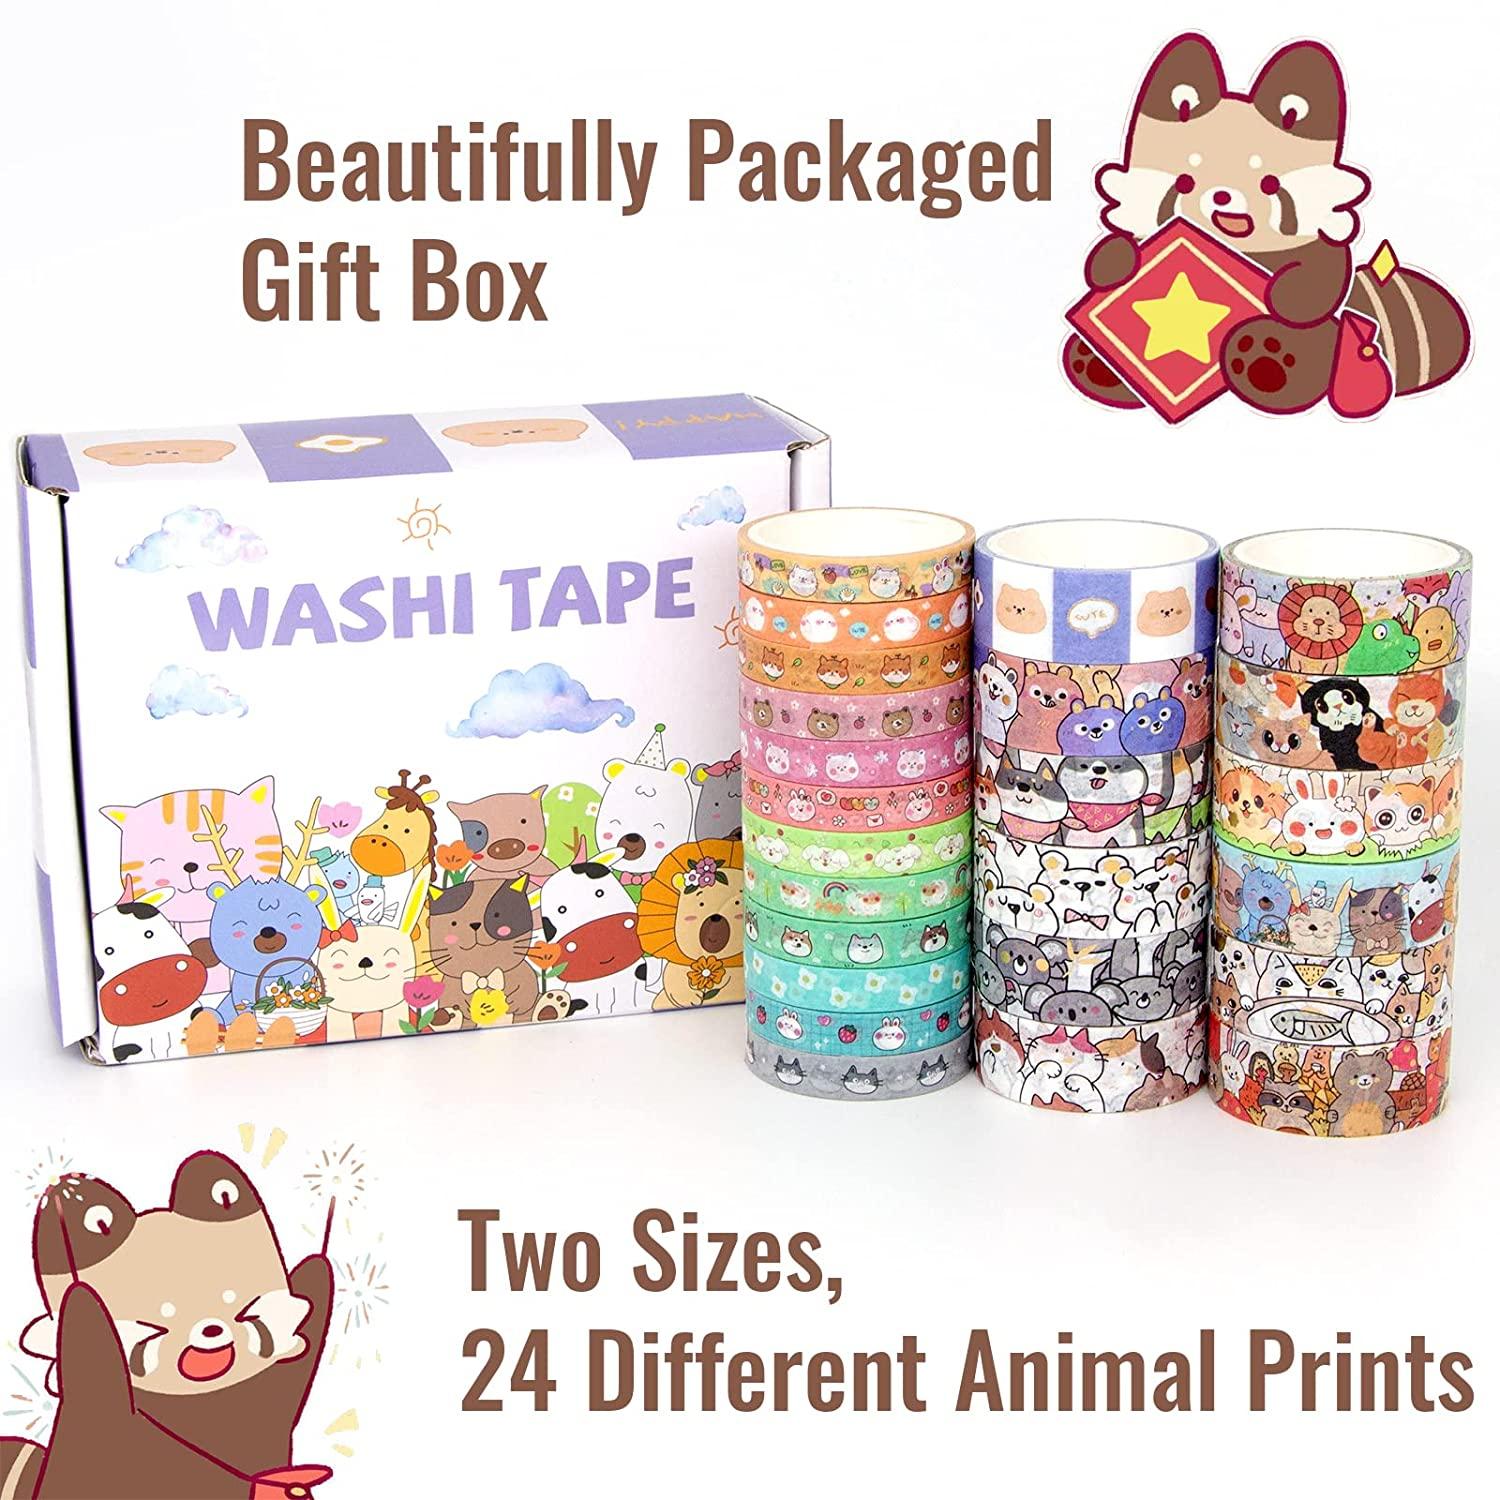 Kawaii Cute Washi Tape Set, Japanese Decorative Masking Tapes Stickers for  Journalings, Scrapbooking and DIY Crafts, Aesthetic School Supplies